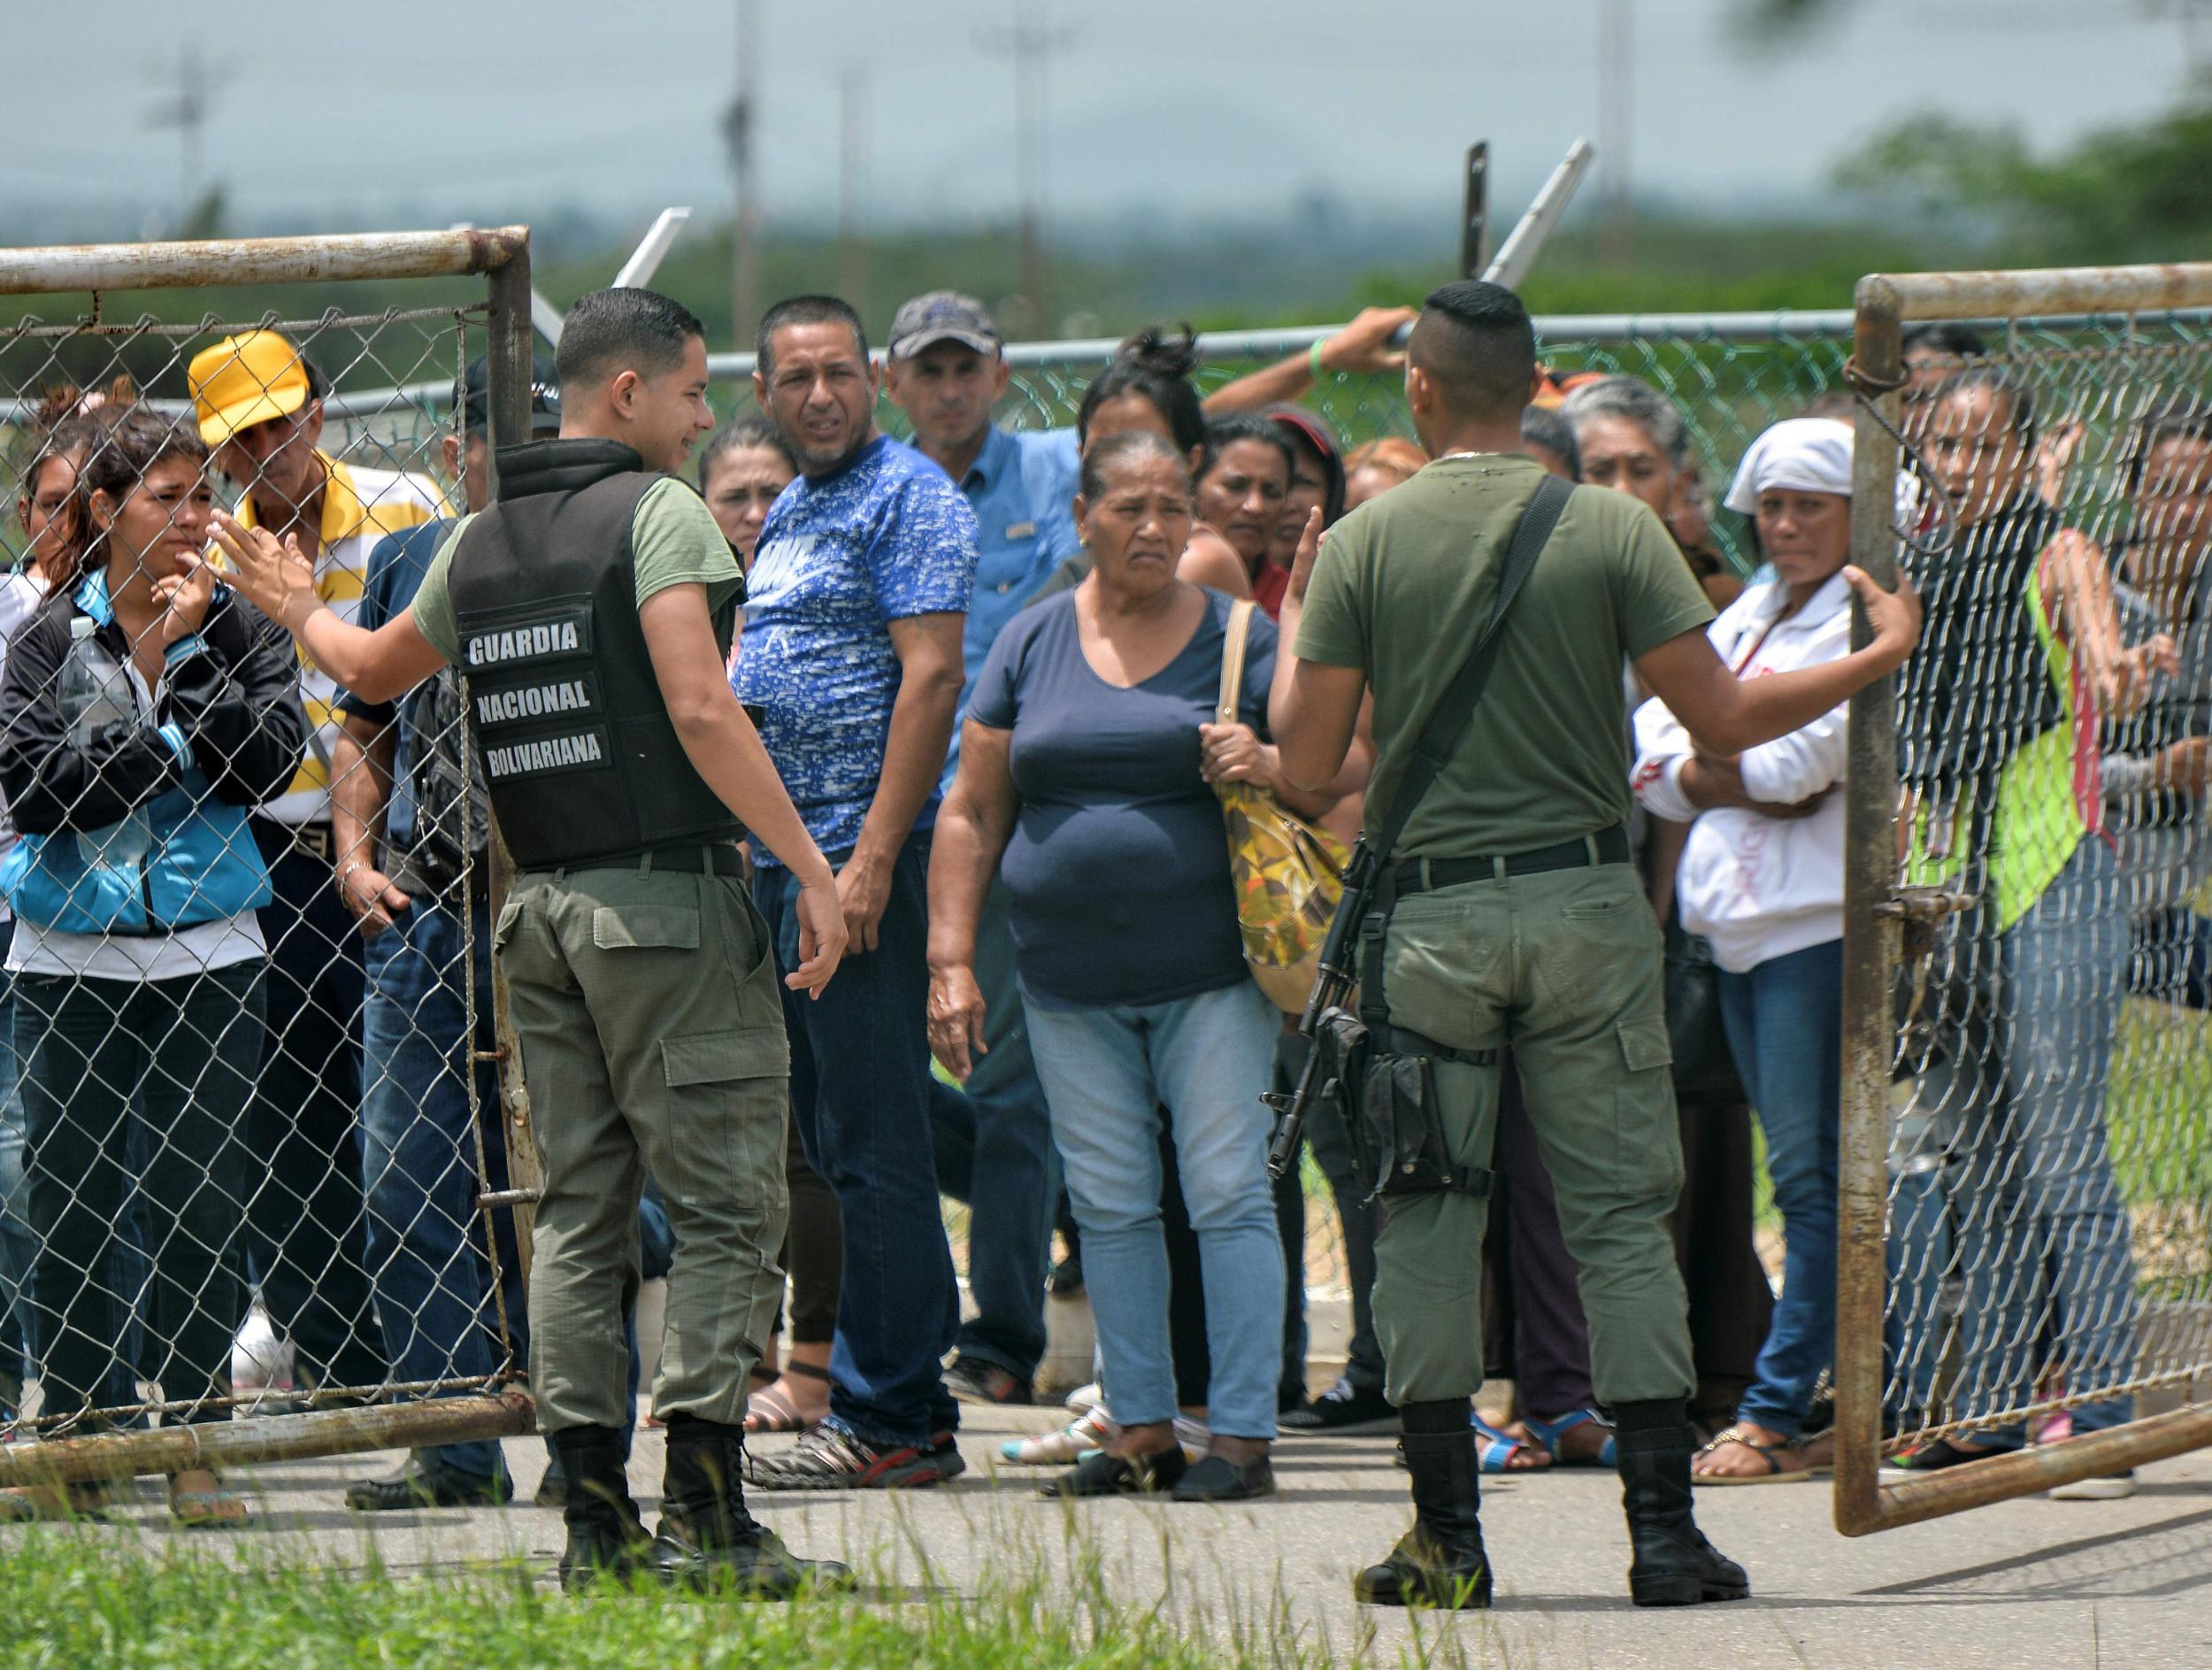 Relatives of inmates gather outside the Fenix Penitentiary following a riot